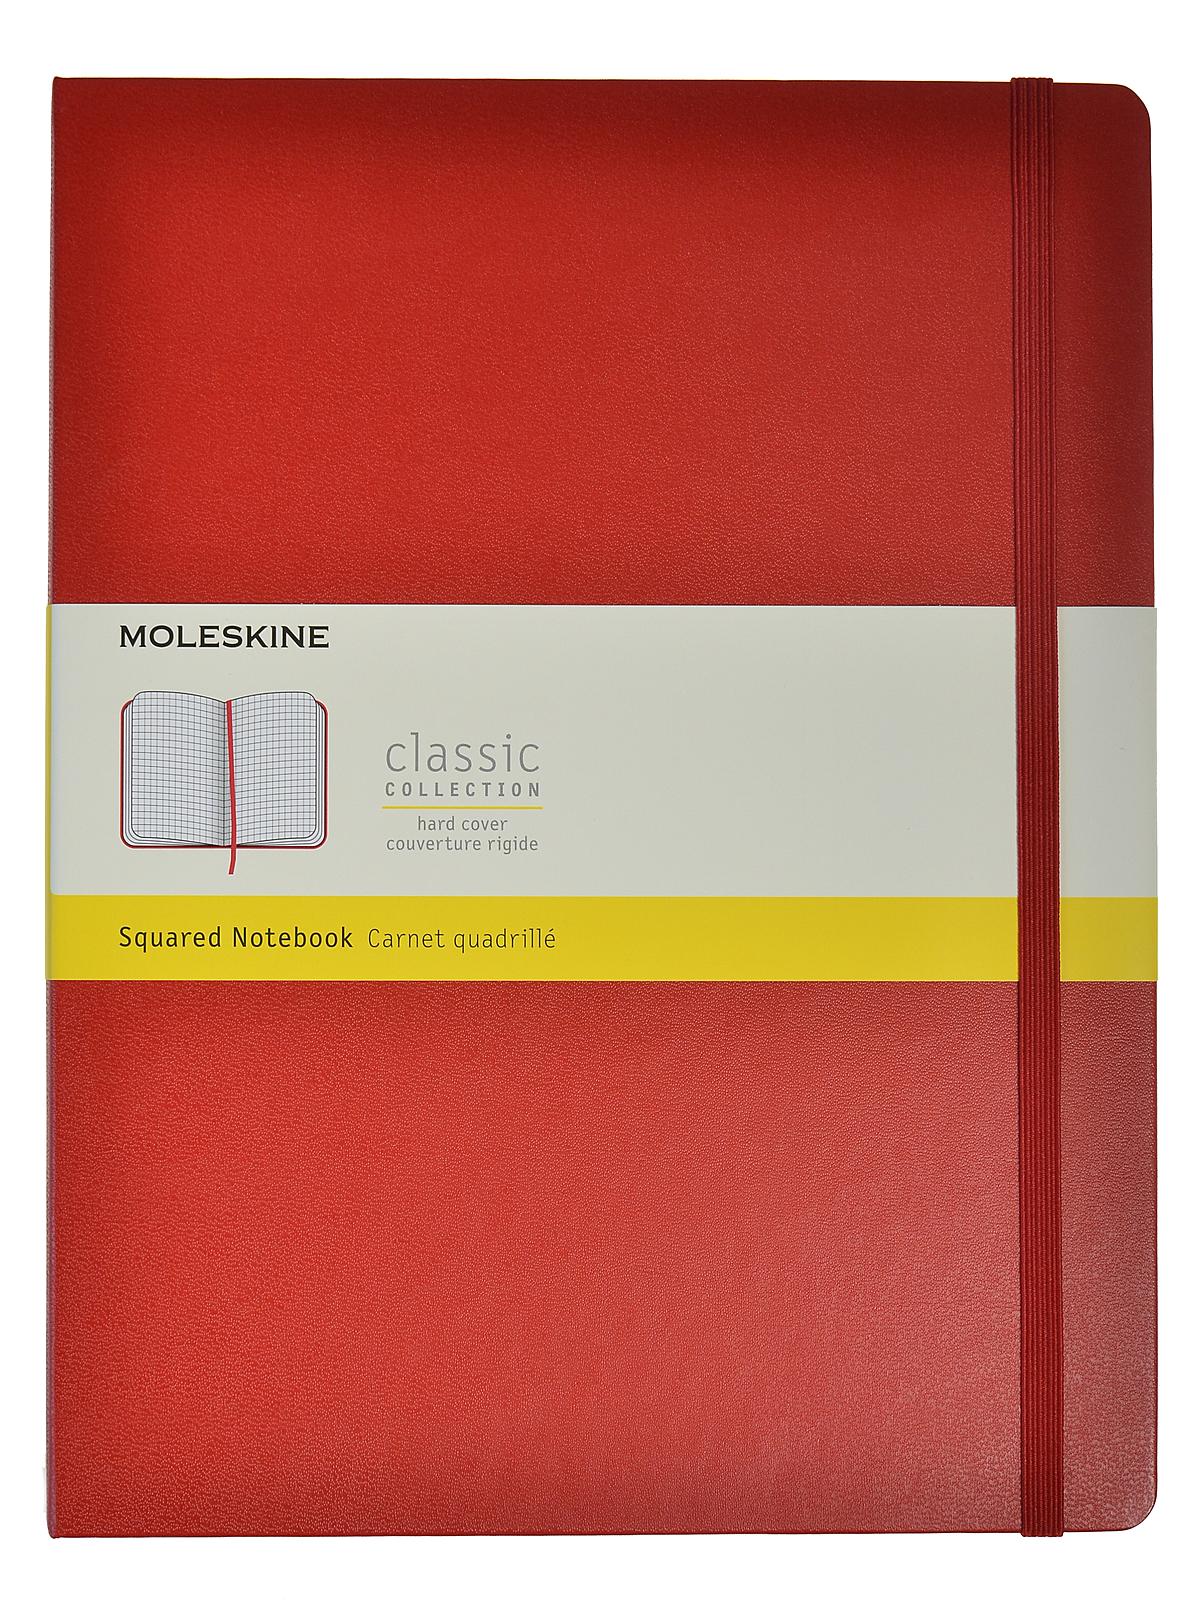 Classic Hard Cover Notebooks Red 7 1 2 In. X 9 3 4 In. 192 Pages, Squared